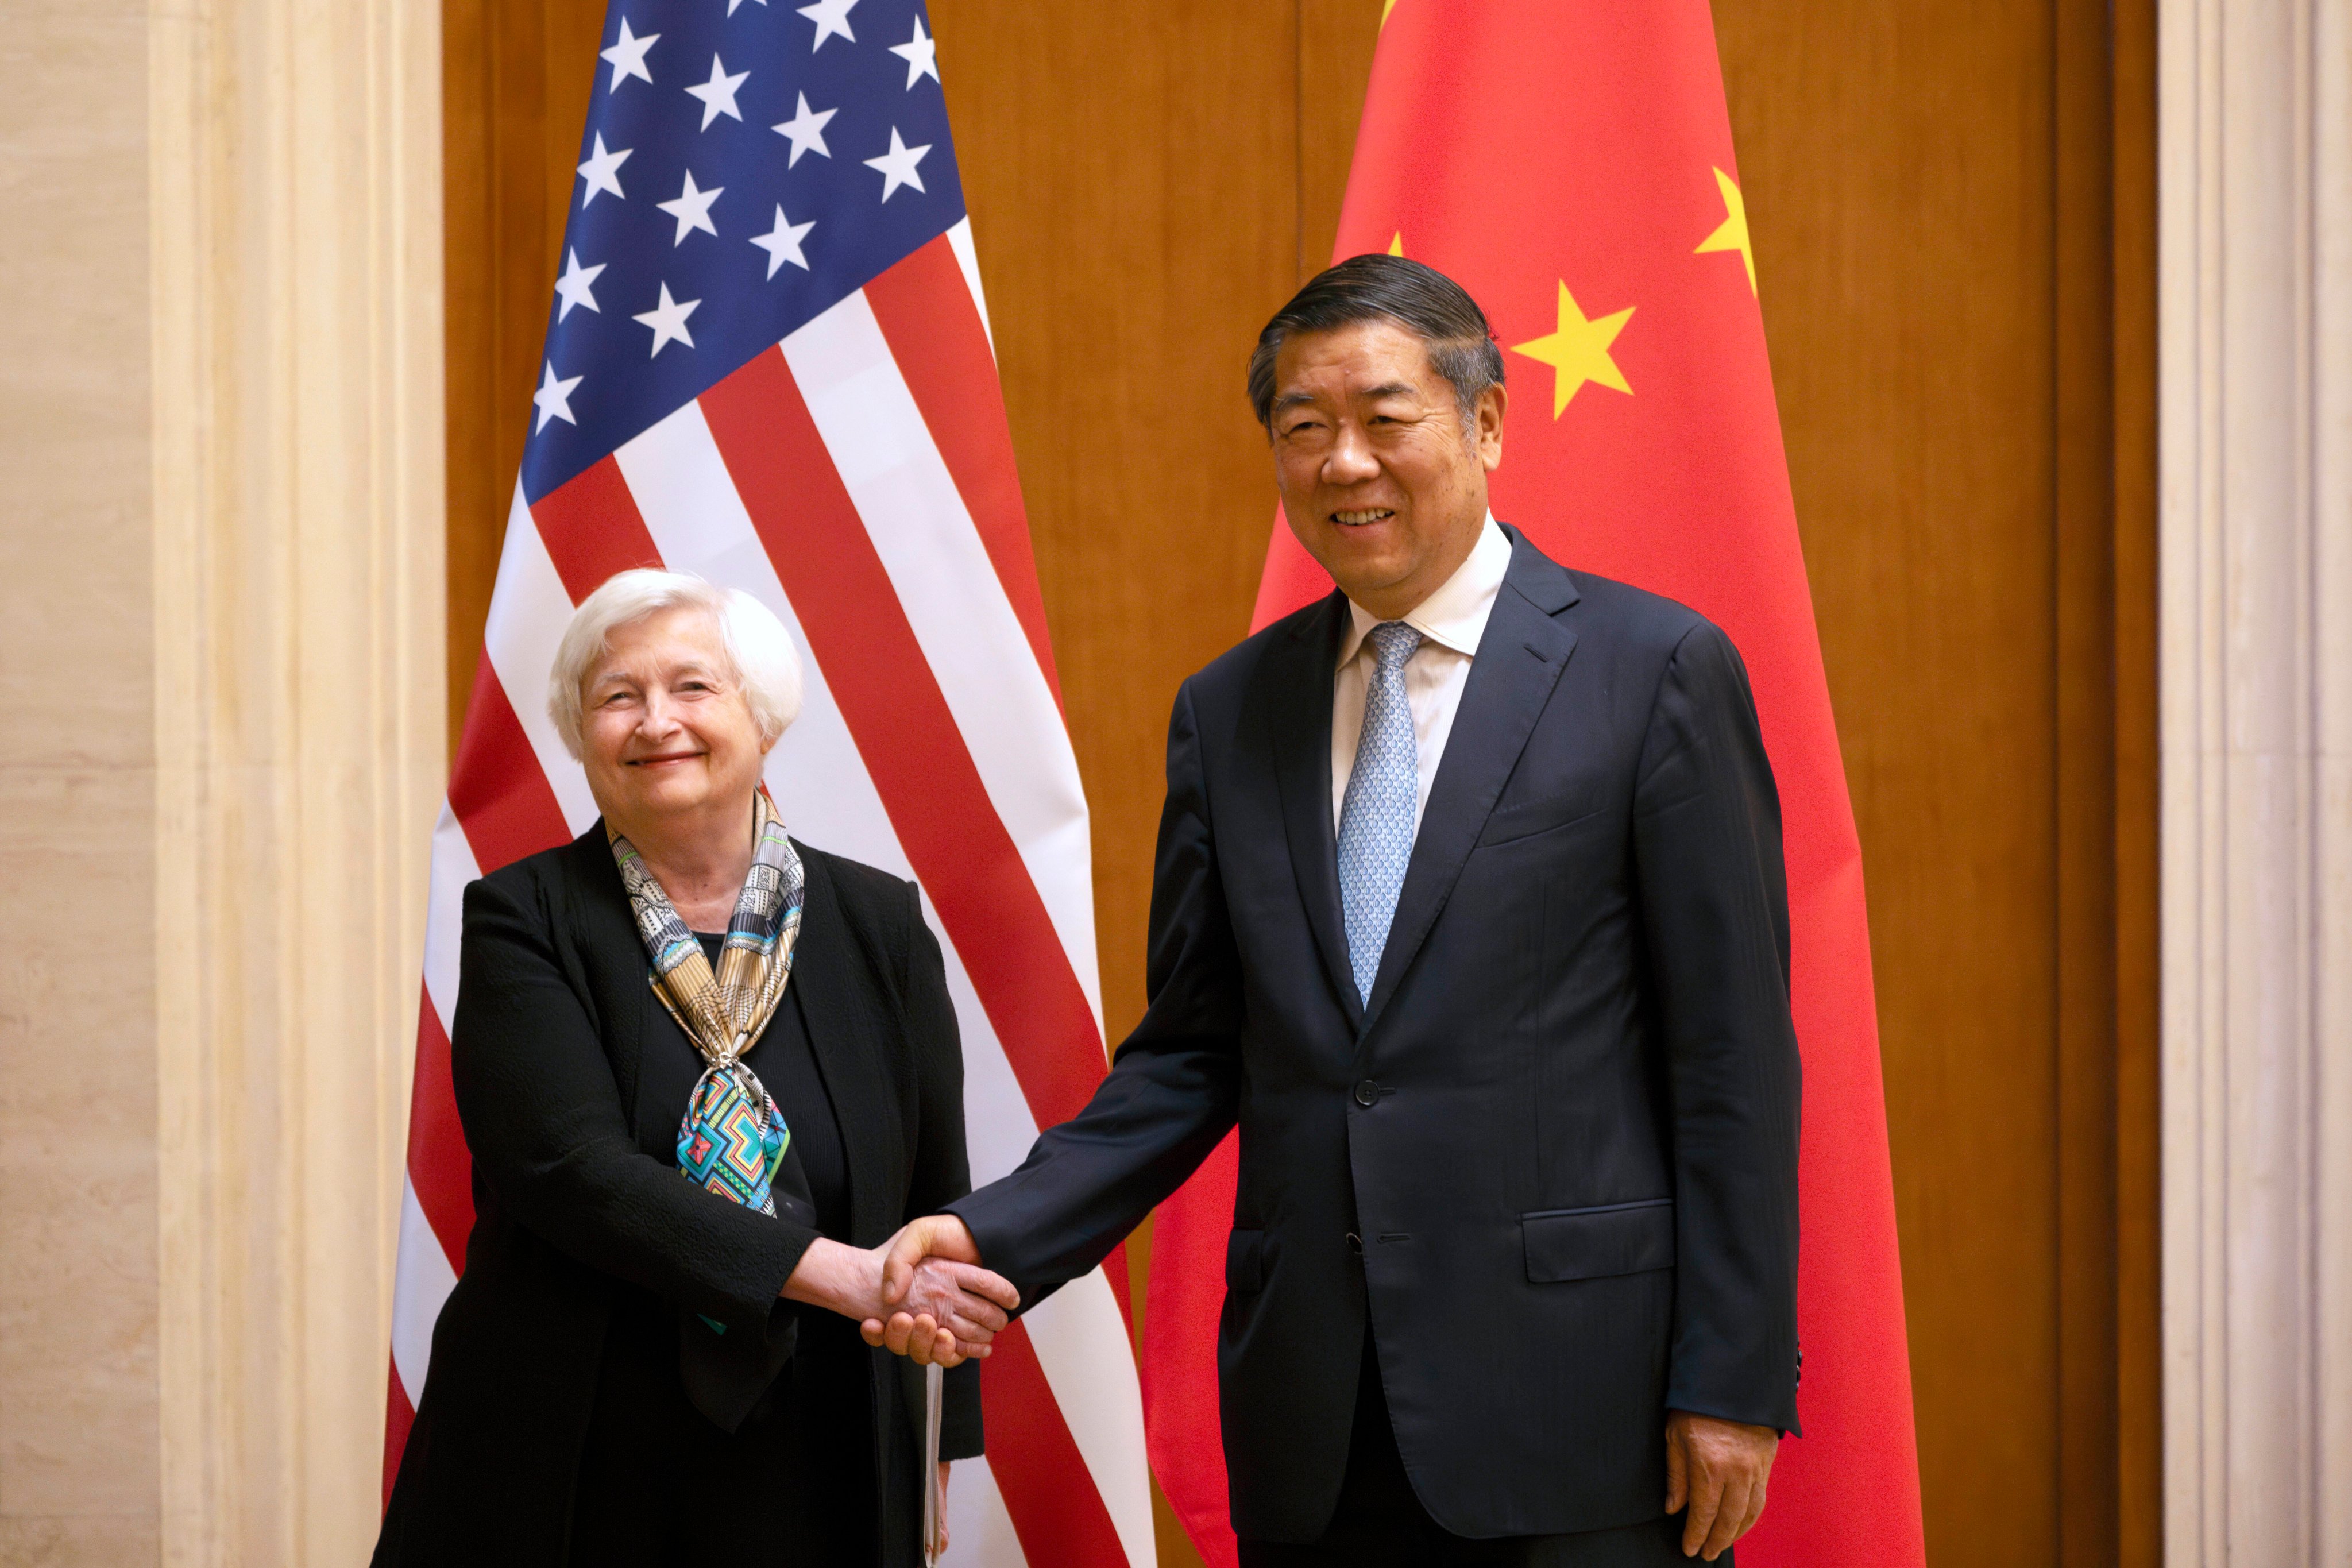 US Treasury Secretary Janet Yellen shakes hands with Chinese Vice-Premier He Lifeng during a meeting at the Diaoyutai State Guesthouse in Beijing on July 8. Photo: AP
